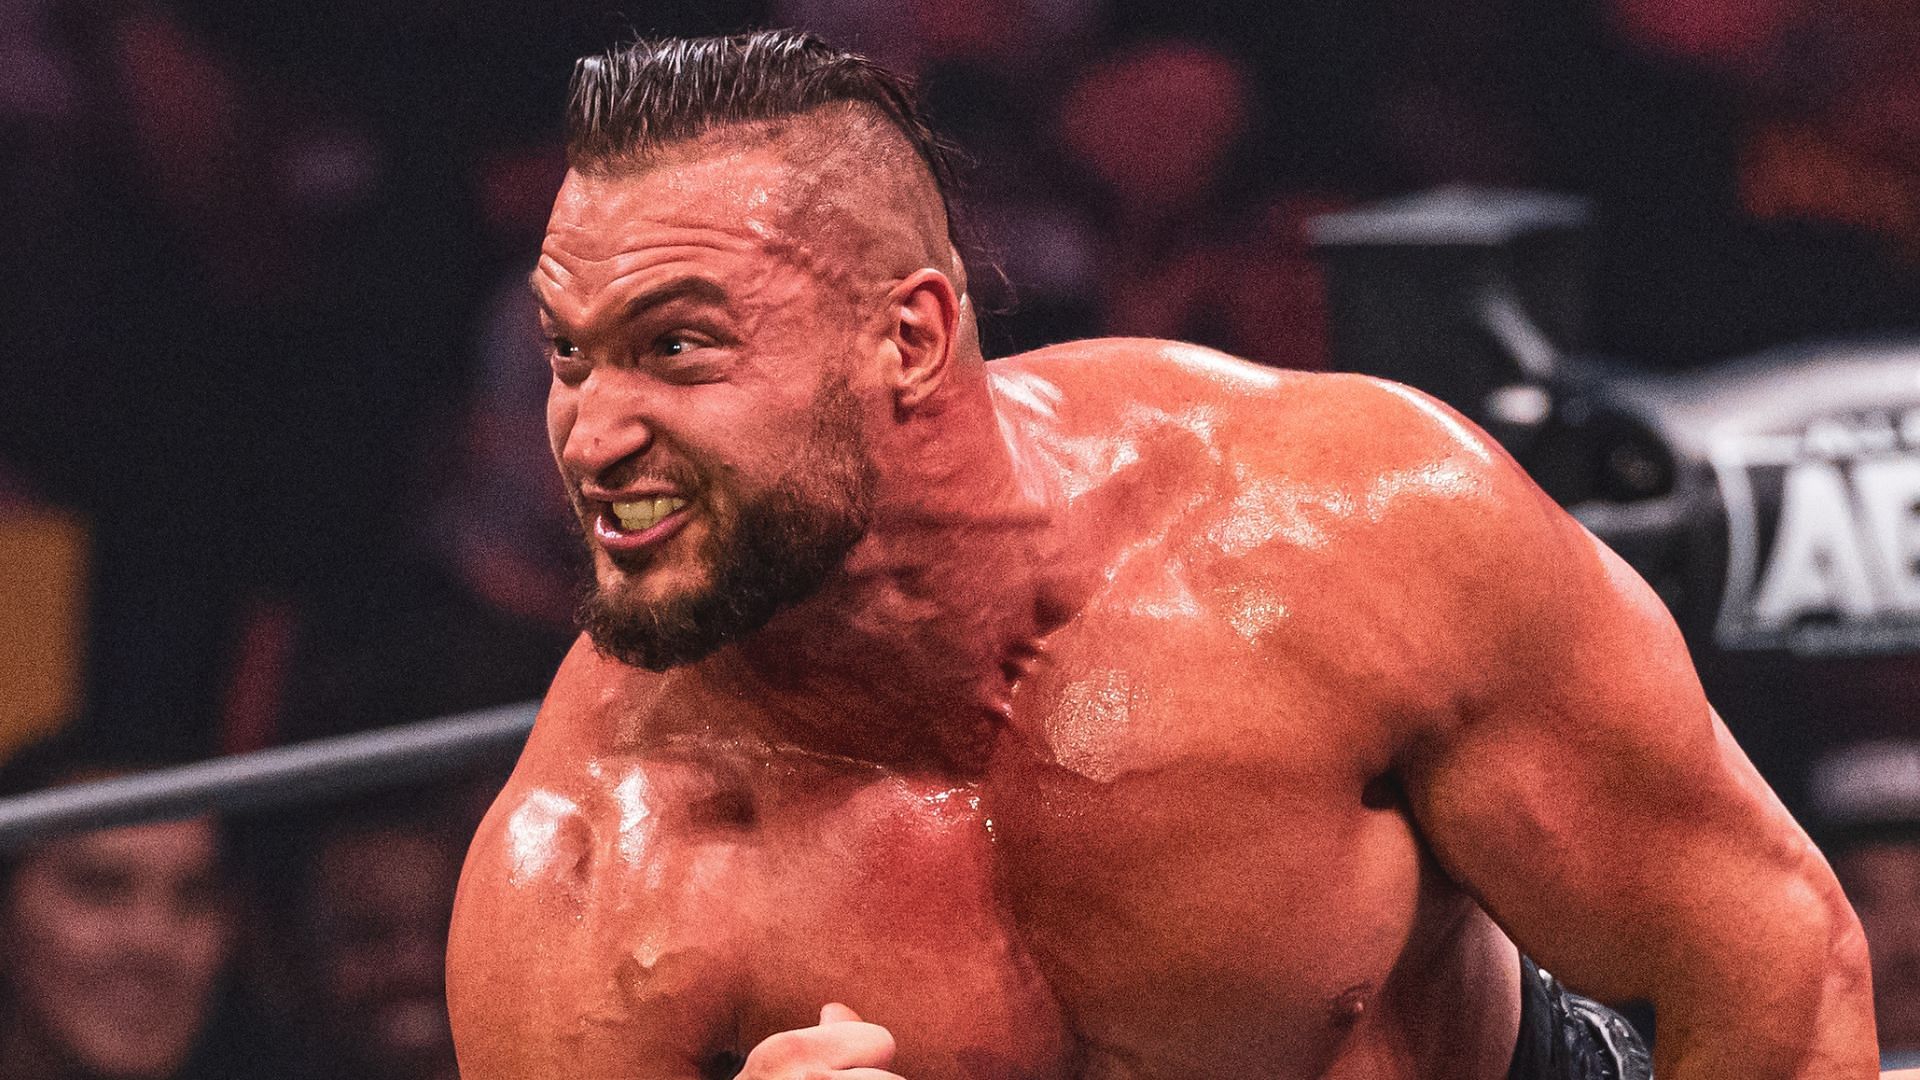 The War Dog at an AEW event in 2022